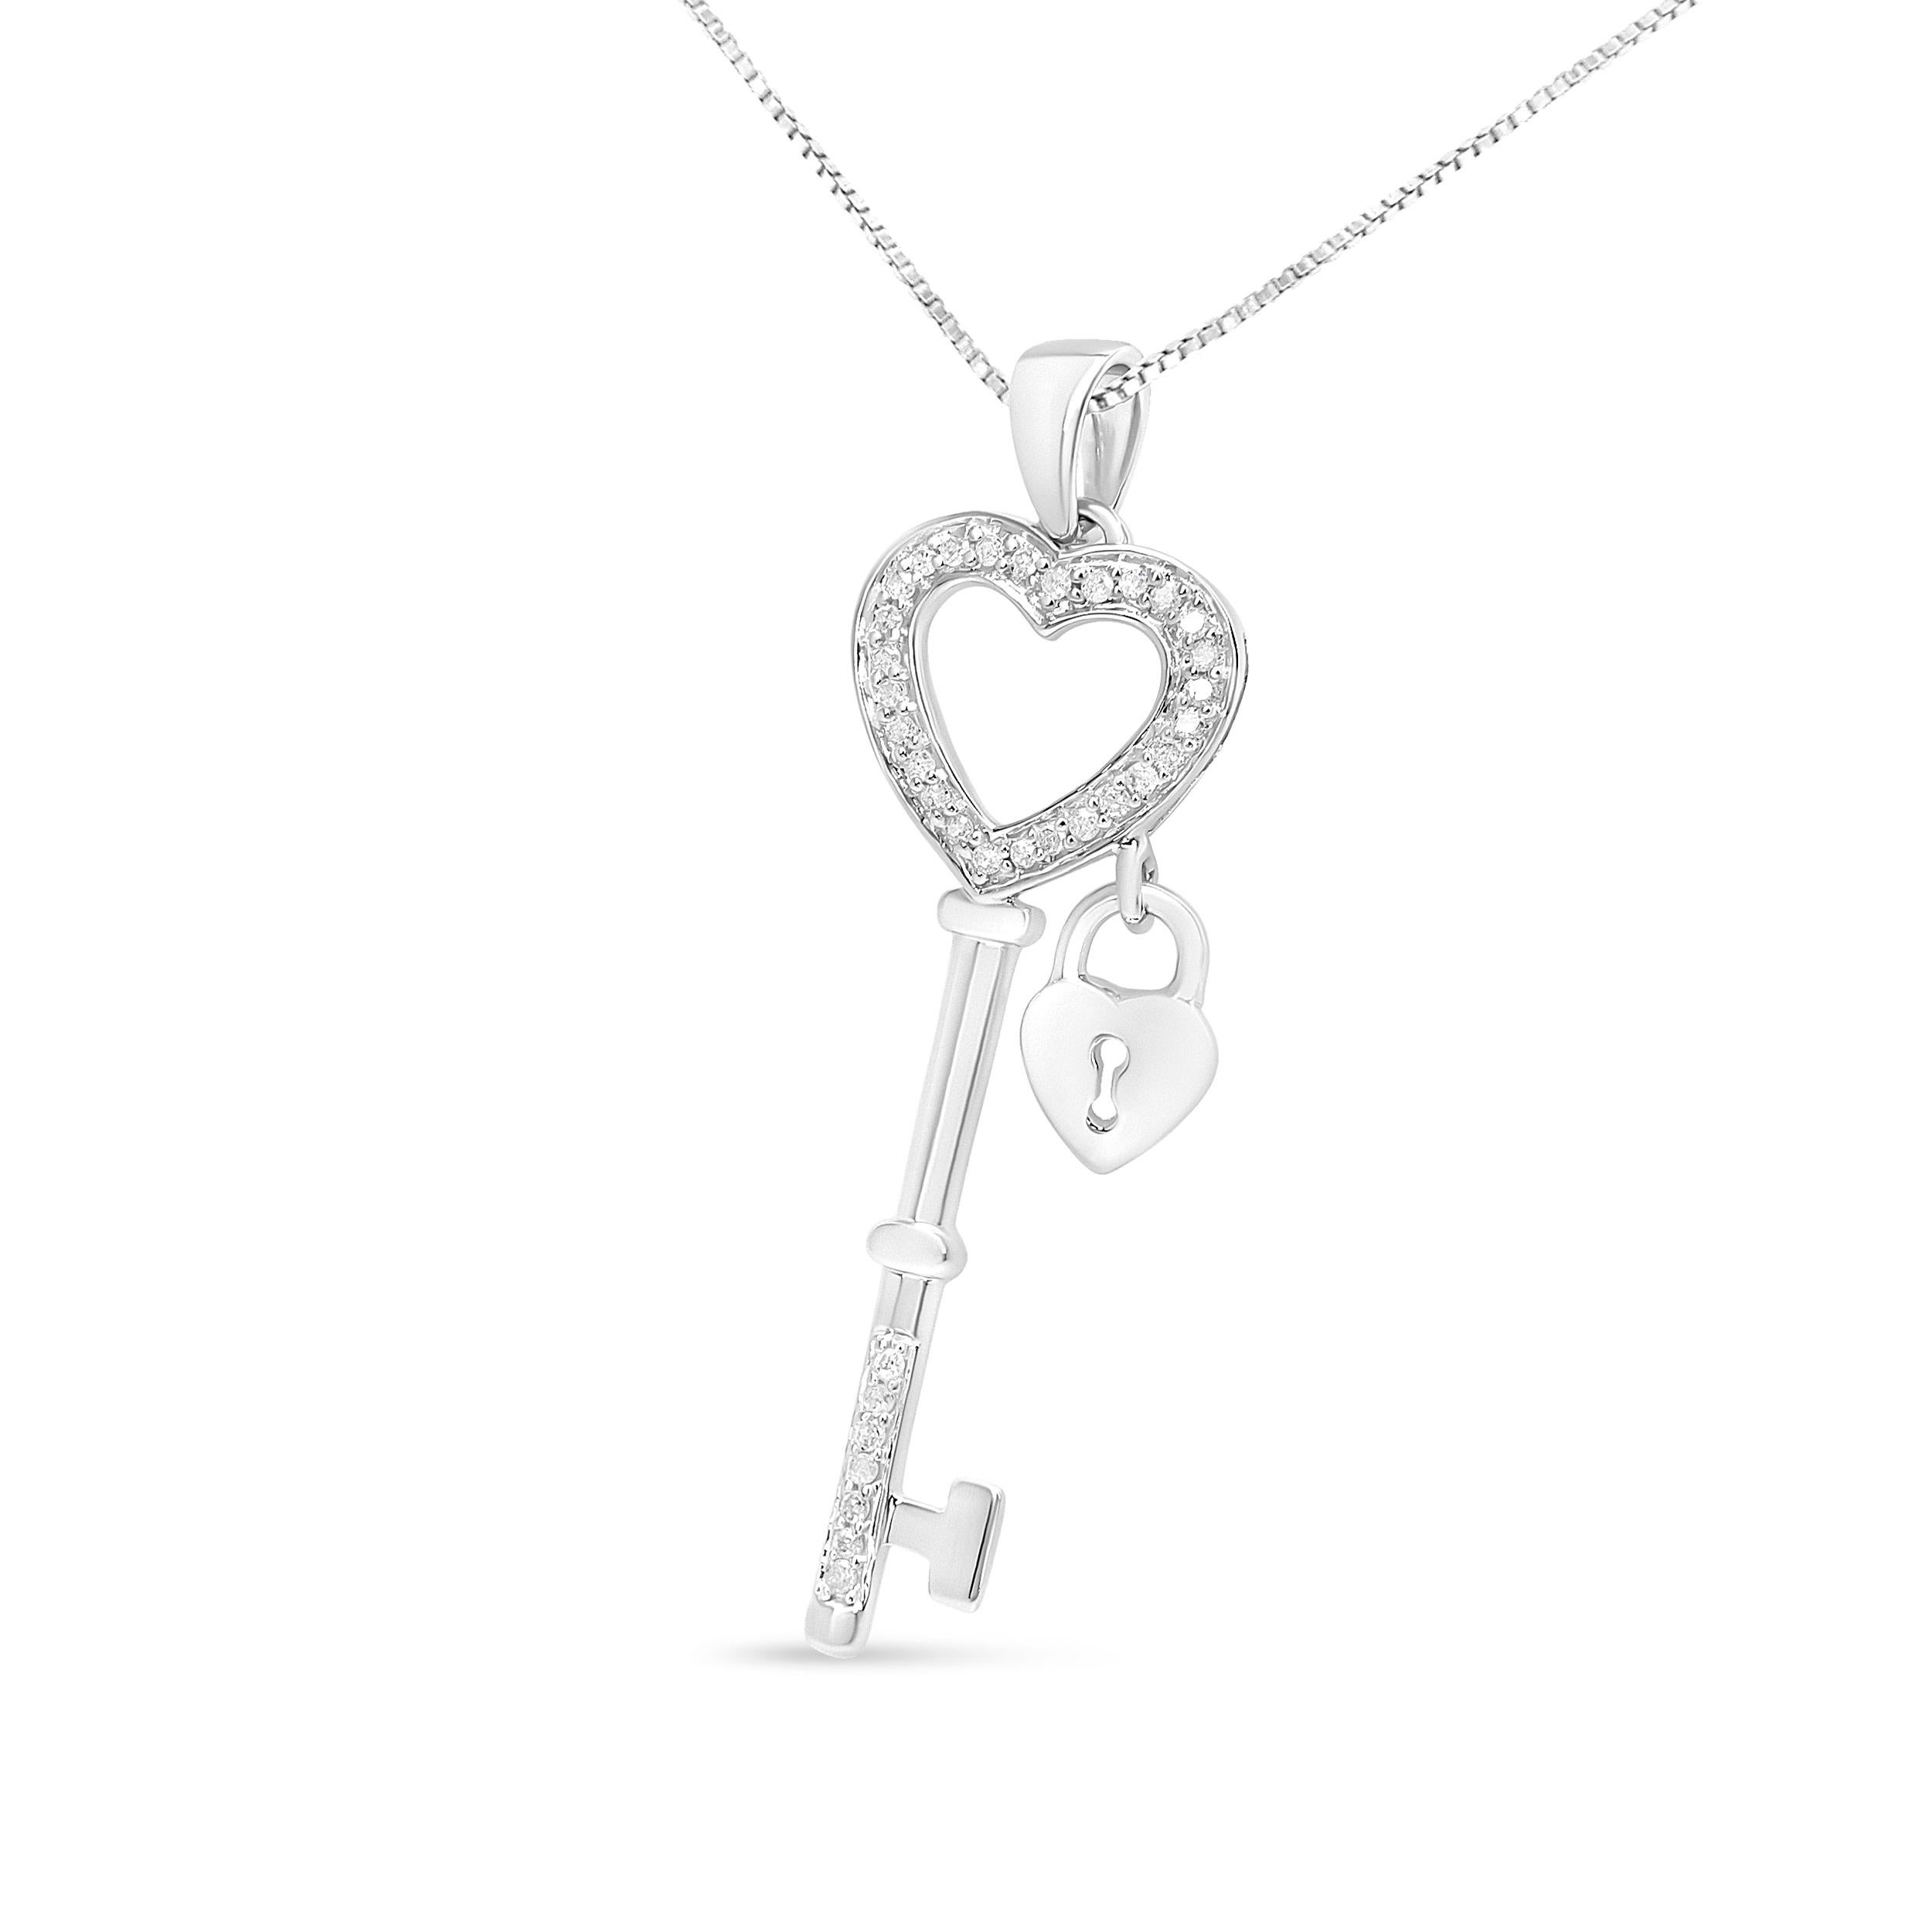 Unlock the key to your heart with this stunning .925 sterling silver pendant necklace. This elegant piece features a captivating diamond-encrusted lock and key design, a symbol of everlasting love and commitment. The pendant sparkles with a total of